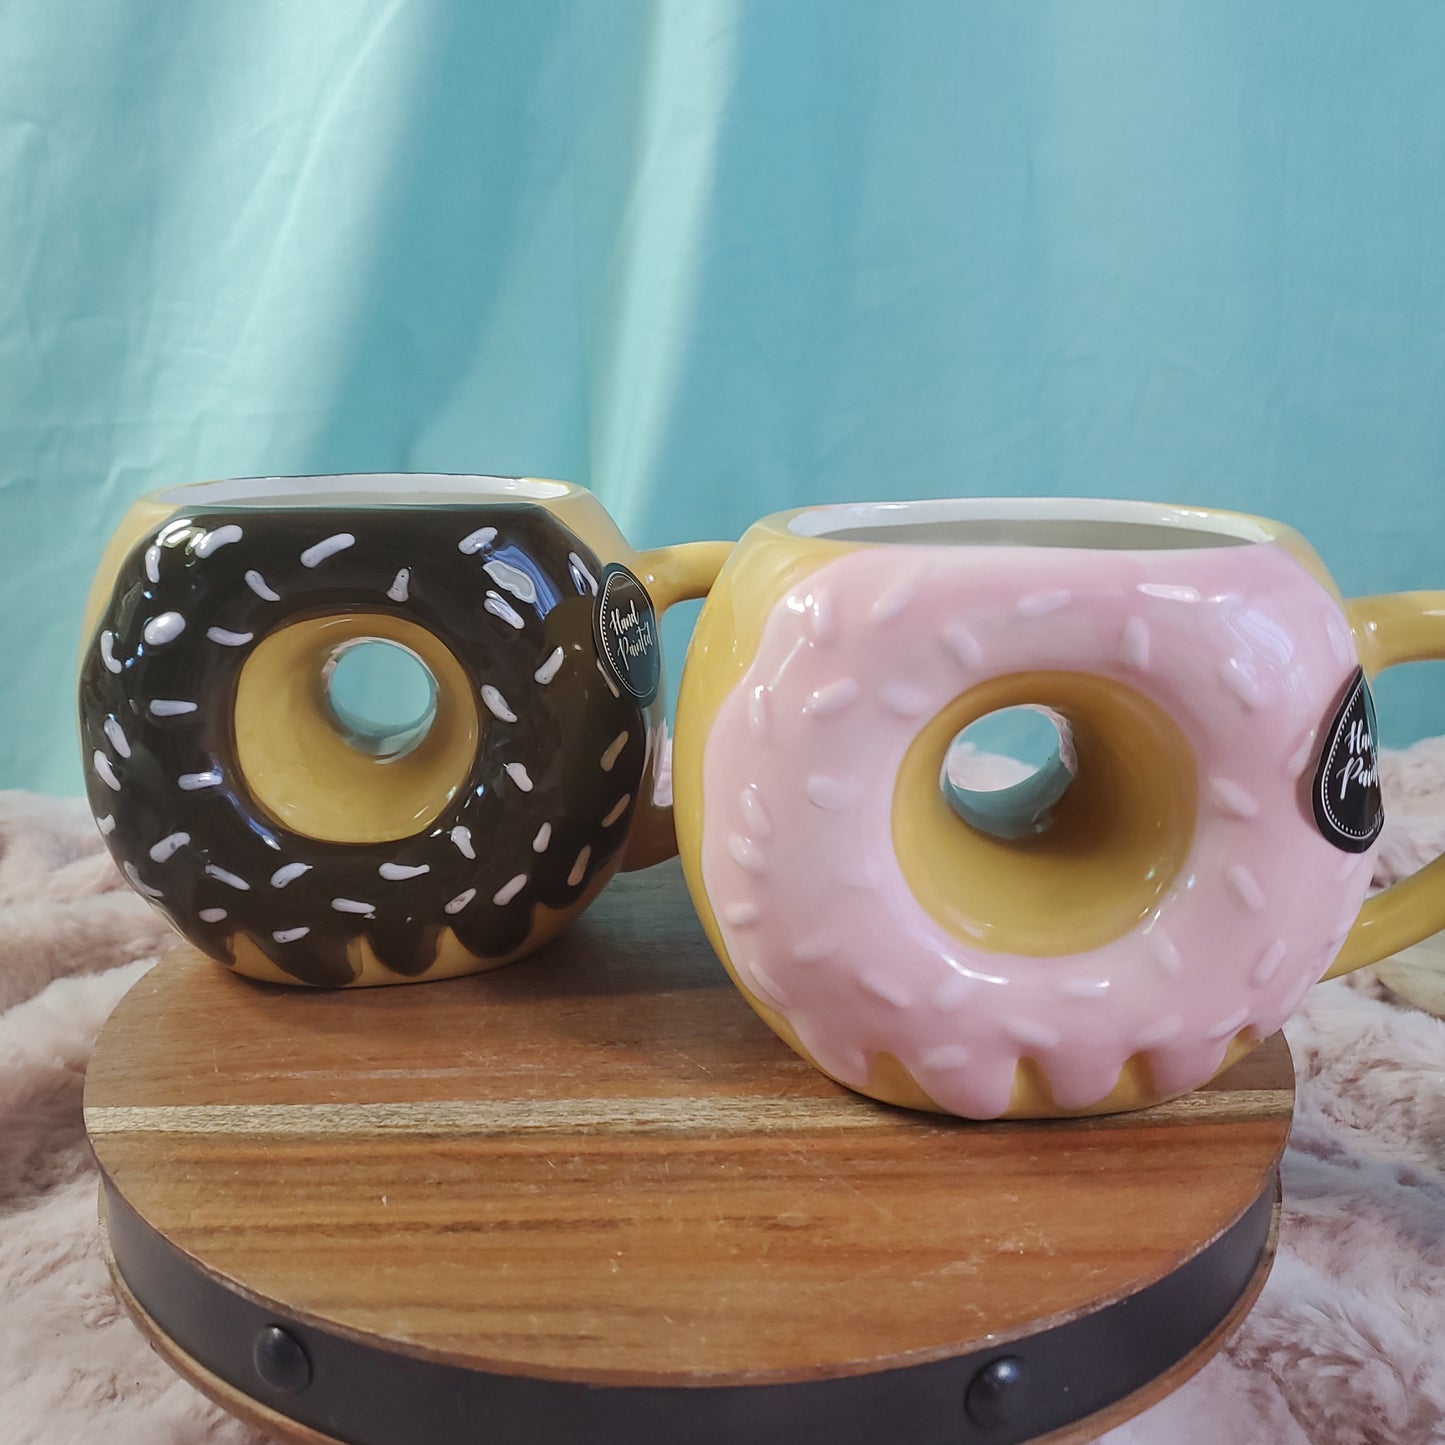 Sheffield Home Frosted Donut Shaped Mug - 10 oz, Hand-Painted